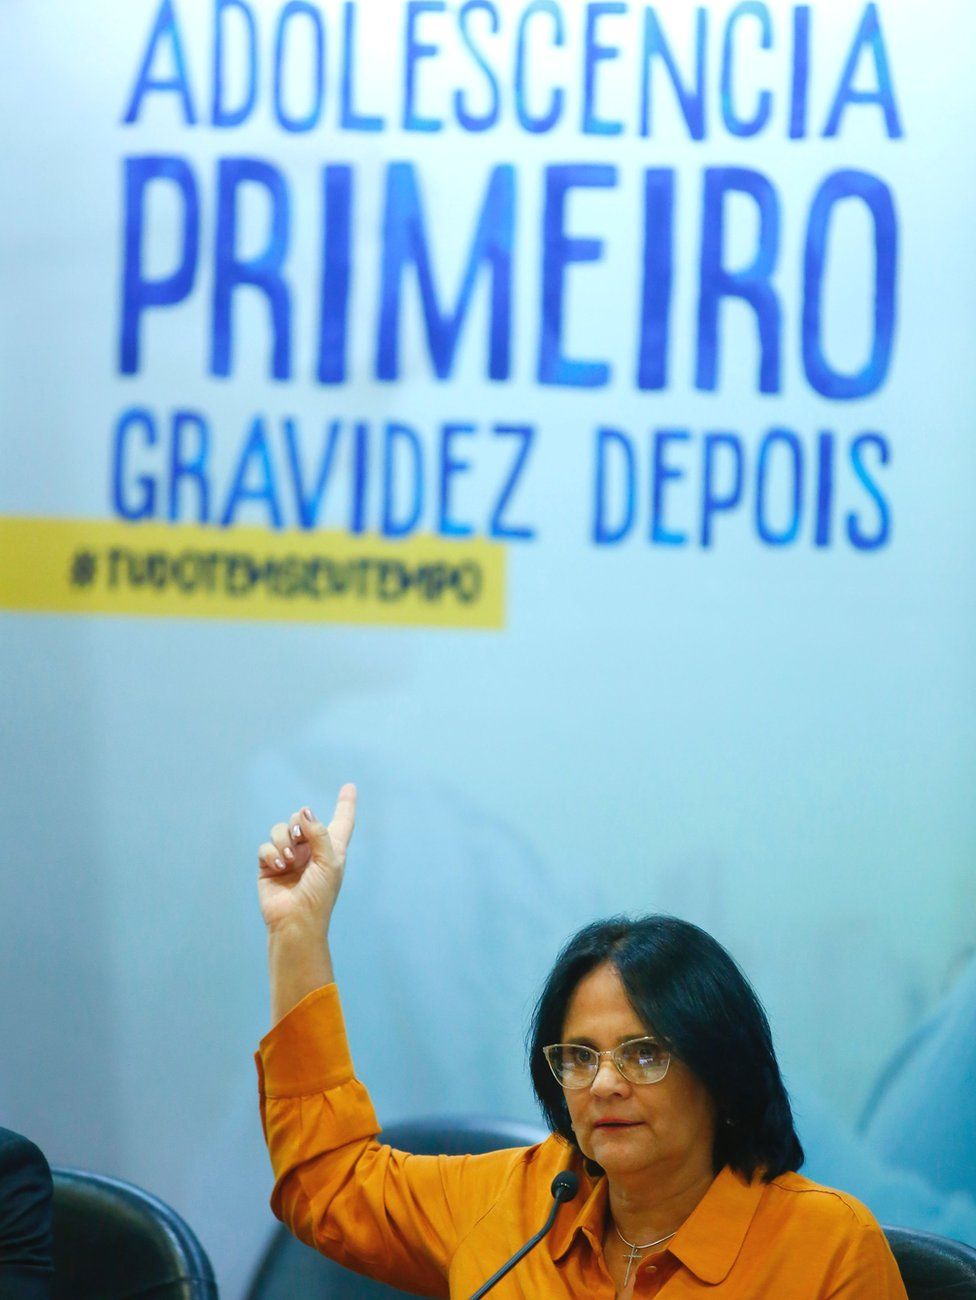 Brazilian Minister of Human Rights and Family, Damares Alves, speaks during a press conference about how to prevent pregnancy in adolescents, at the Ministry of Health building, in Brasilia, 3 February 2020